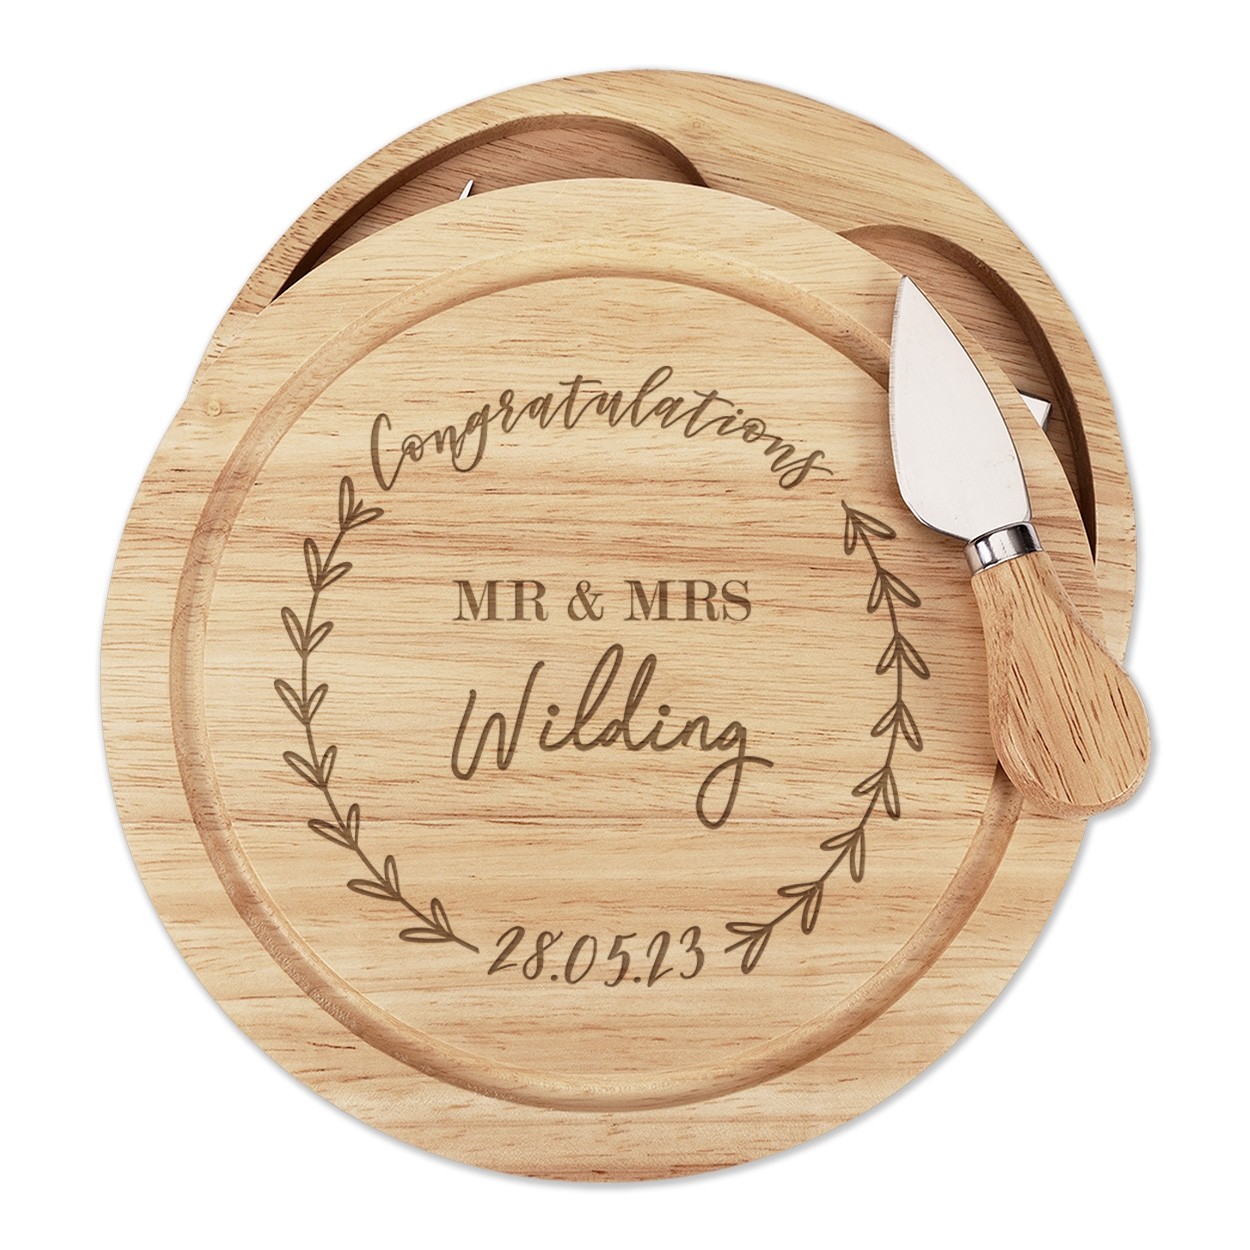 Personalised Congratulations Name Mr & Mrs Wedding Wooden Cheese Board Set 4 Knives